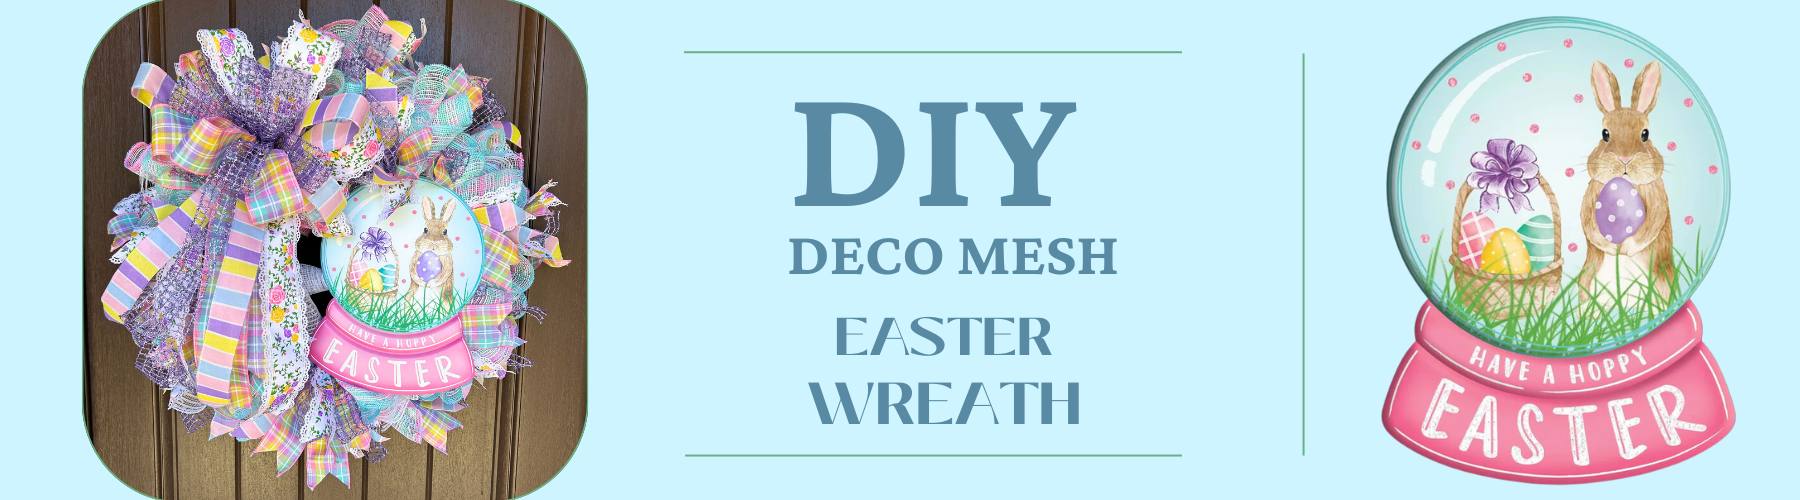 diy deco mesh wreath with have a hoppy easter snow globe sign